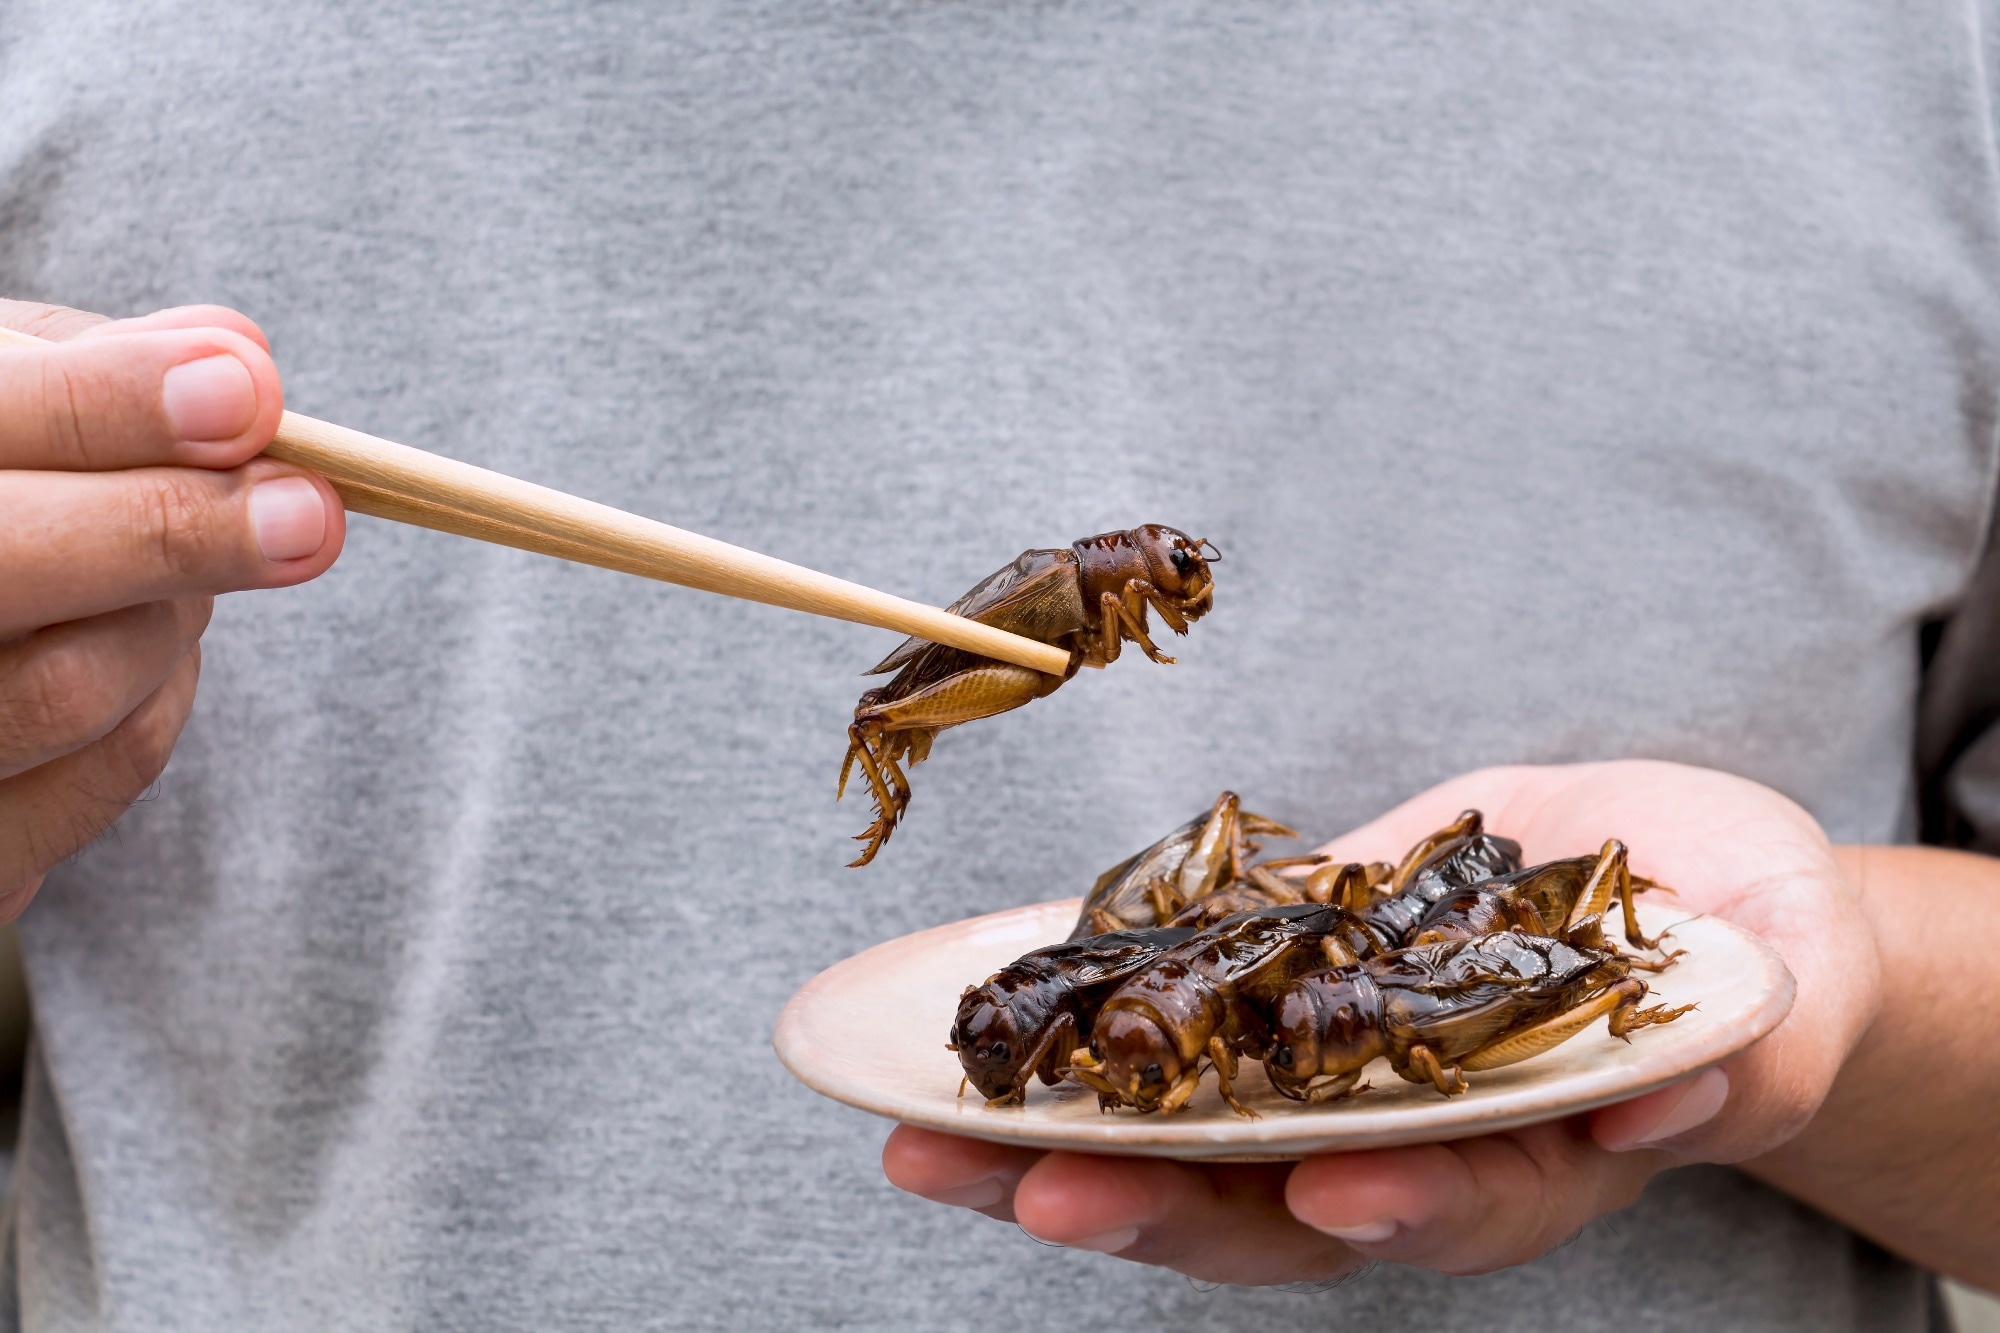 Study: Insects as food - Changes in consumers’ acceptance of entomophagy in Hungary between 2016 and 2021. Image Credit: nicemyphoto/Shutterstock.com